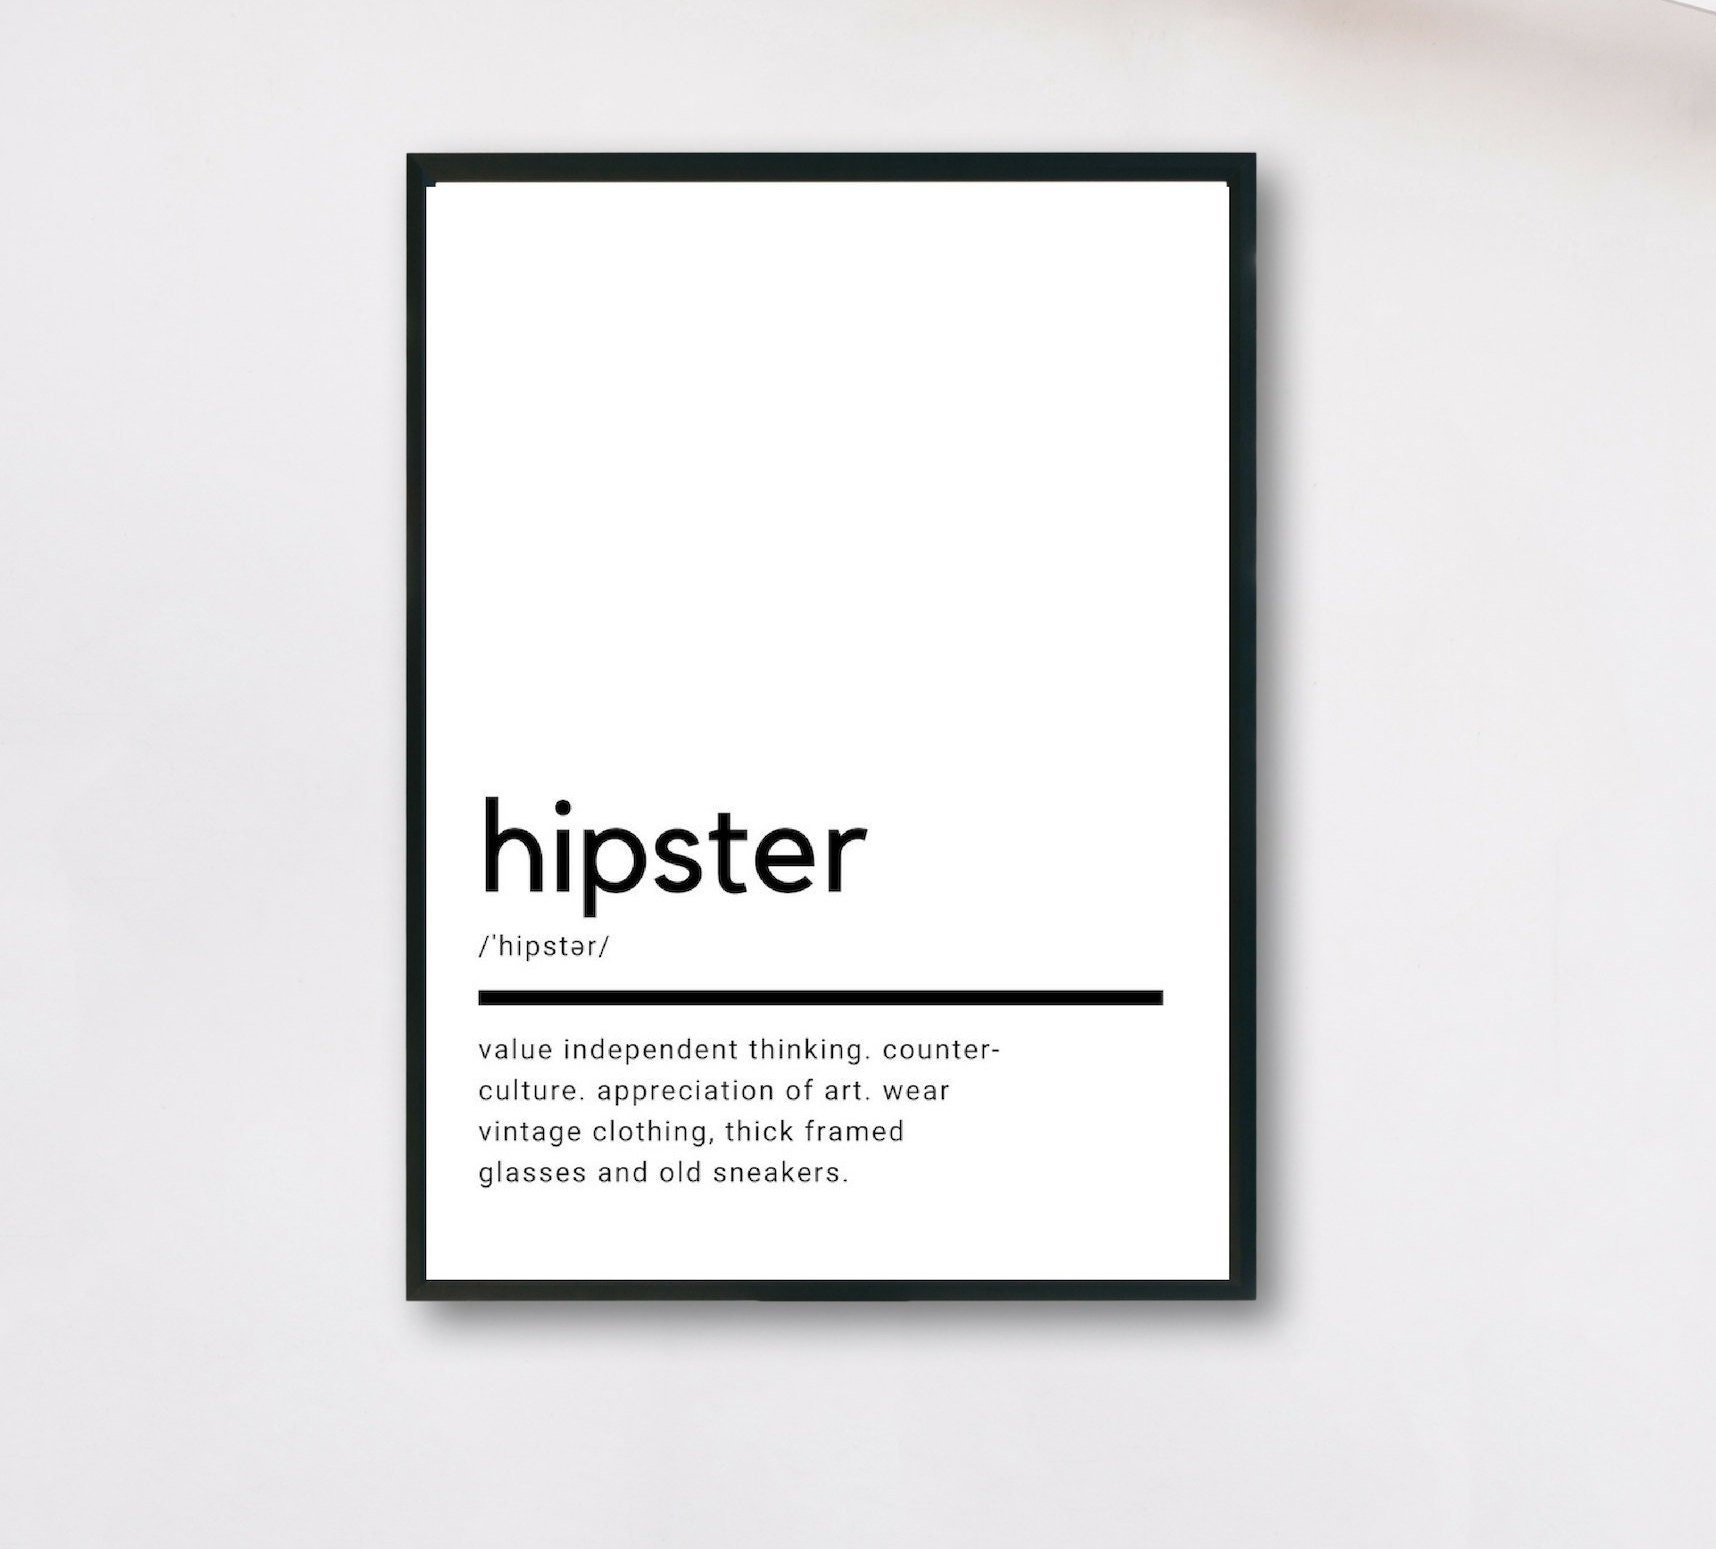 Homeless vs Hipster  Hipster funny, Hipster fashion, Hipster